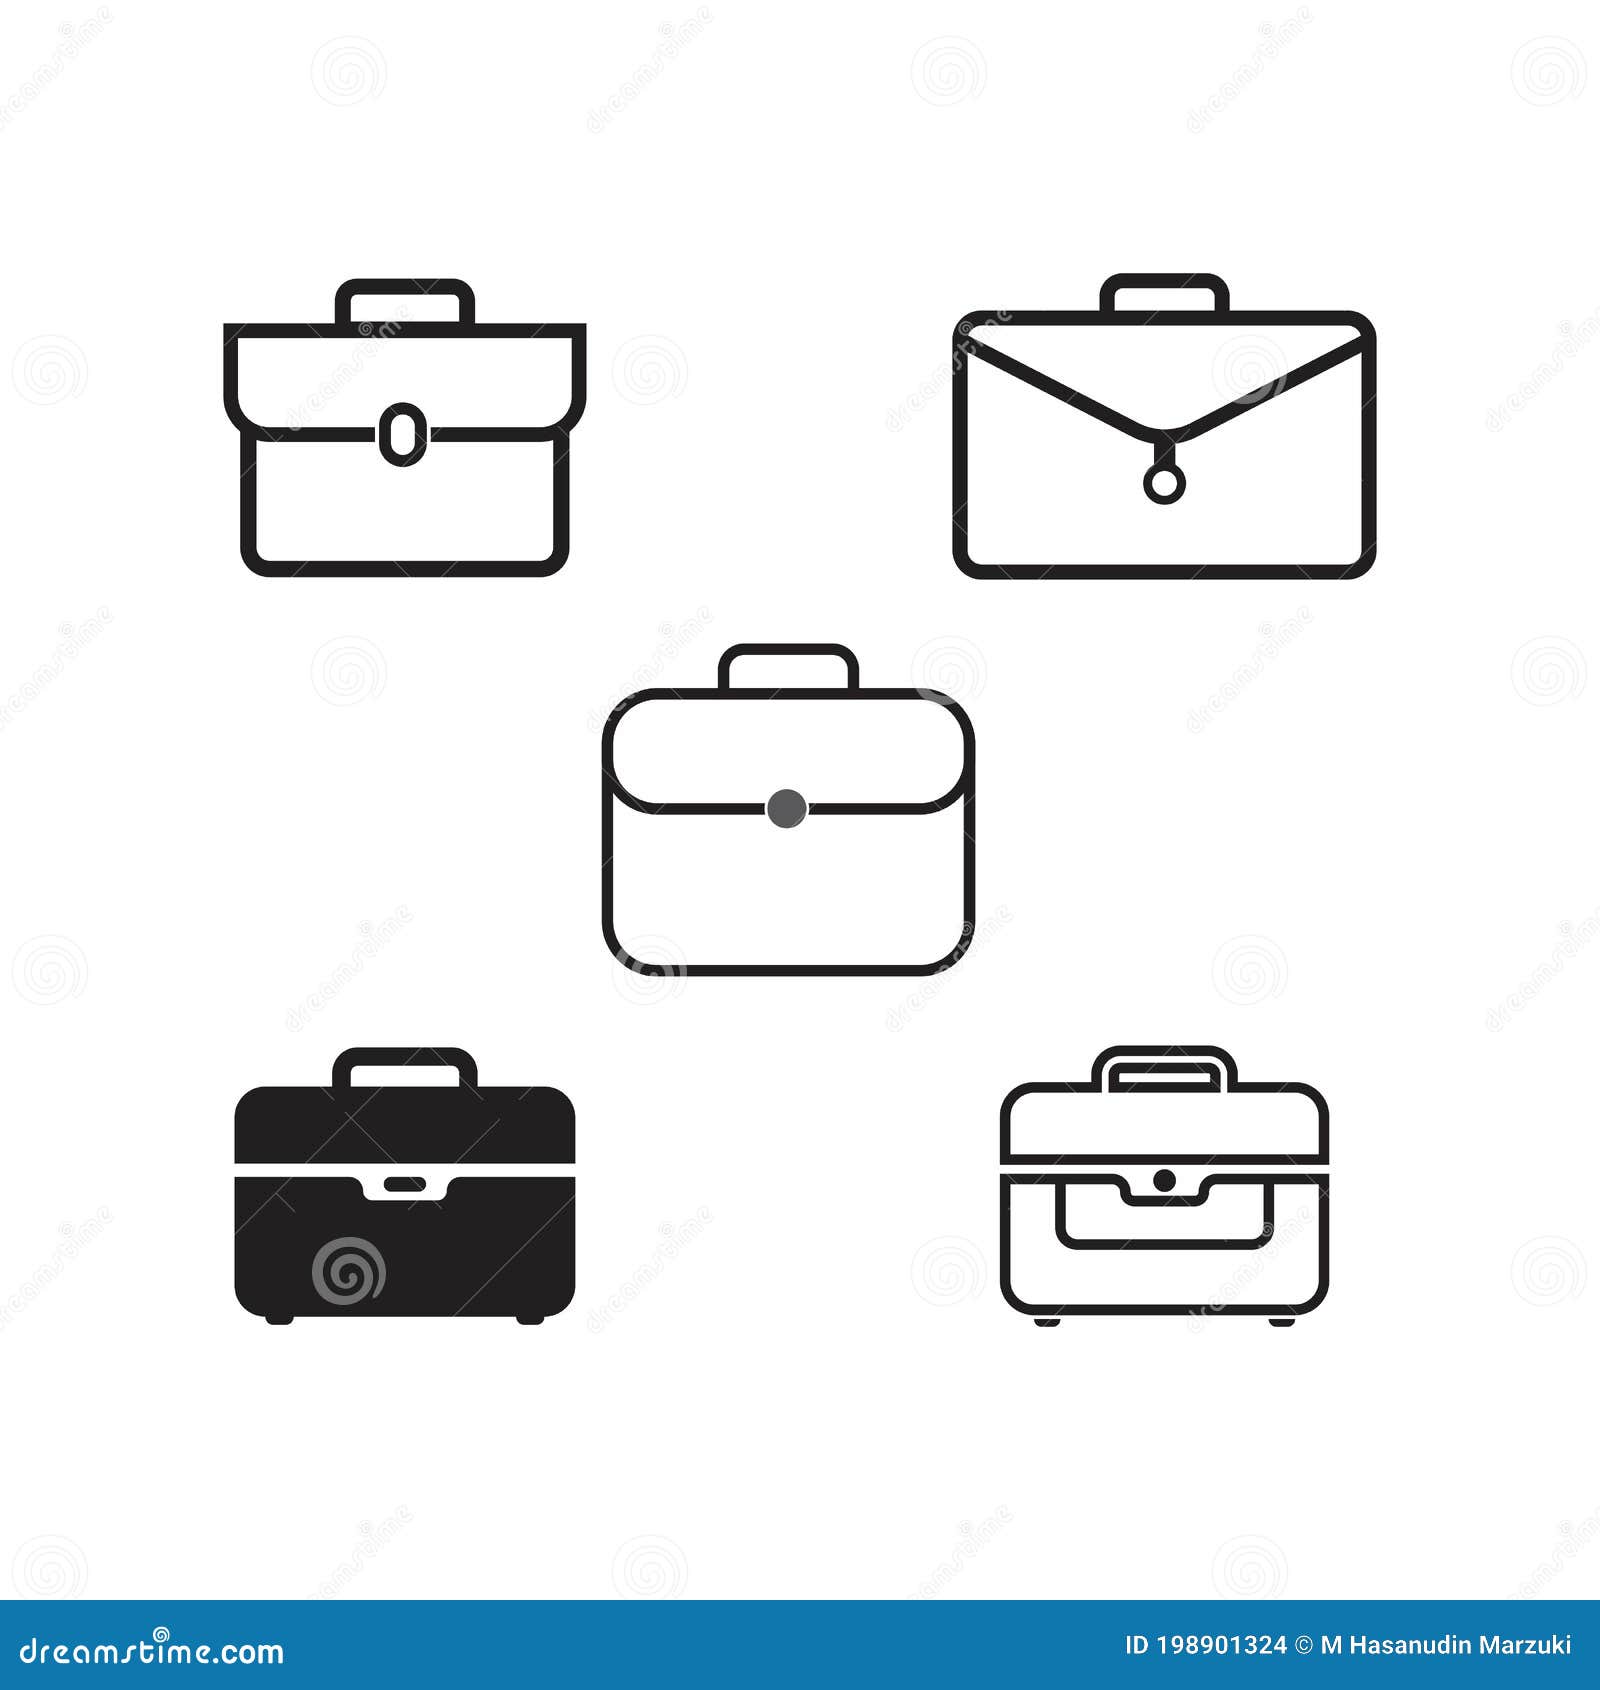 Brief case icon stock vector. Illustration of lock, business - 198901324